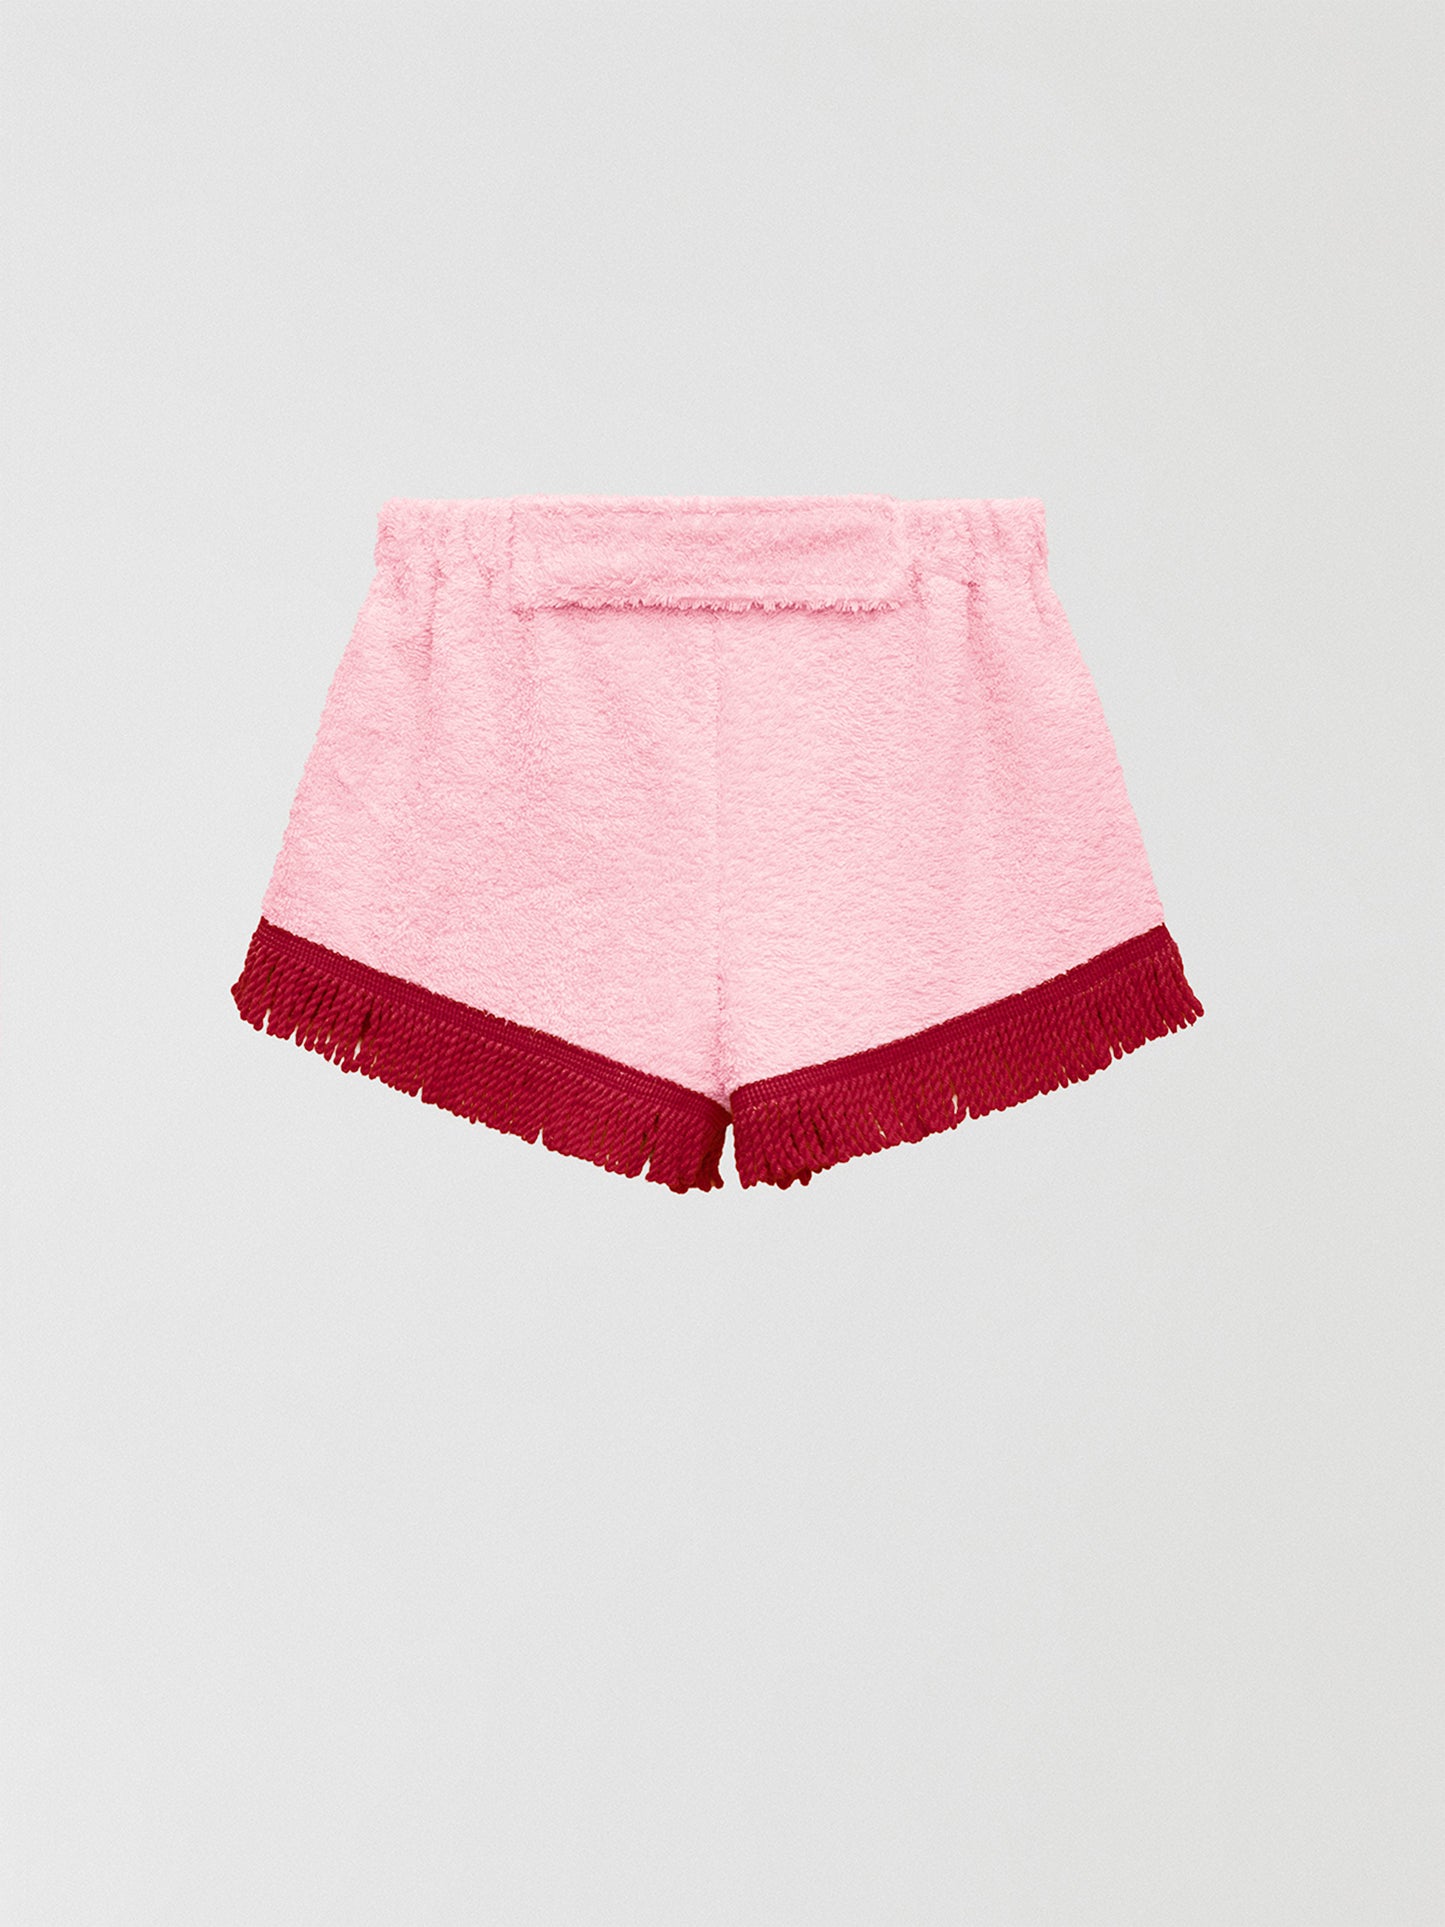 Towel shorts made in pink cotton with red fringes. 